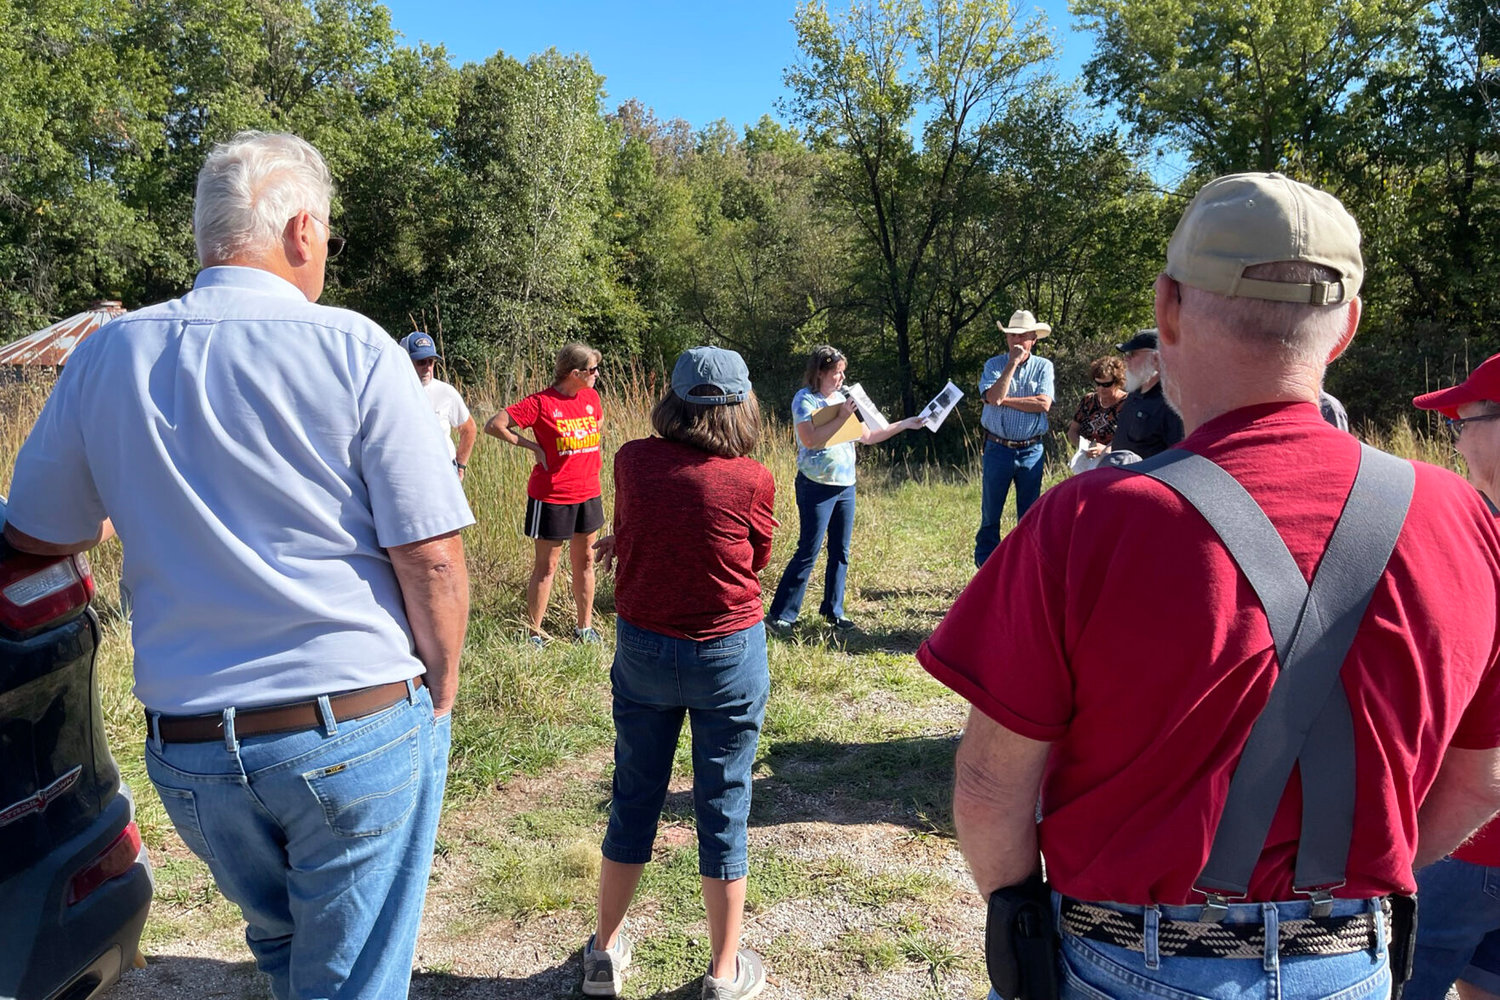 Glenna Daniels-Young speaks at the site of the Baiotto Mine #11, also known as the Simler Bluff Mine, on Hwy. 11 next to the Chariton River. The shaft was started in 1925 and was finished in 1933. The coal seam was 30 inches thick and the mine shaft was 90 feet deep, only 50 feet below the level of the river. Daniels-Young also spoke about Simlerville, the coal camp surrounding the mine, which included a store, gas station and garage.